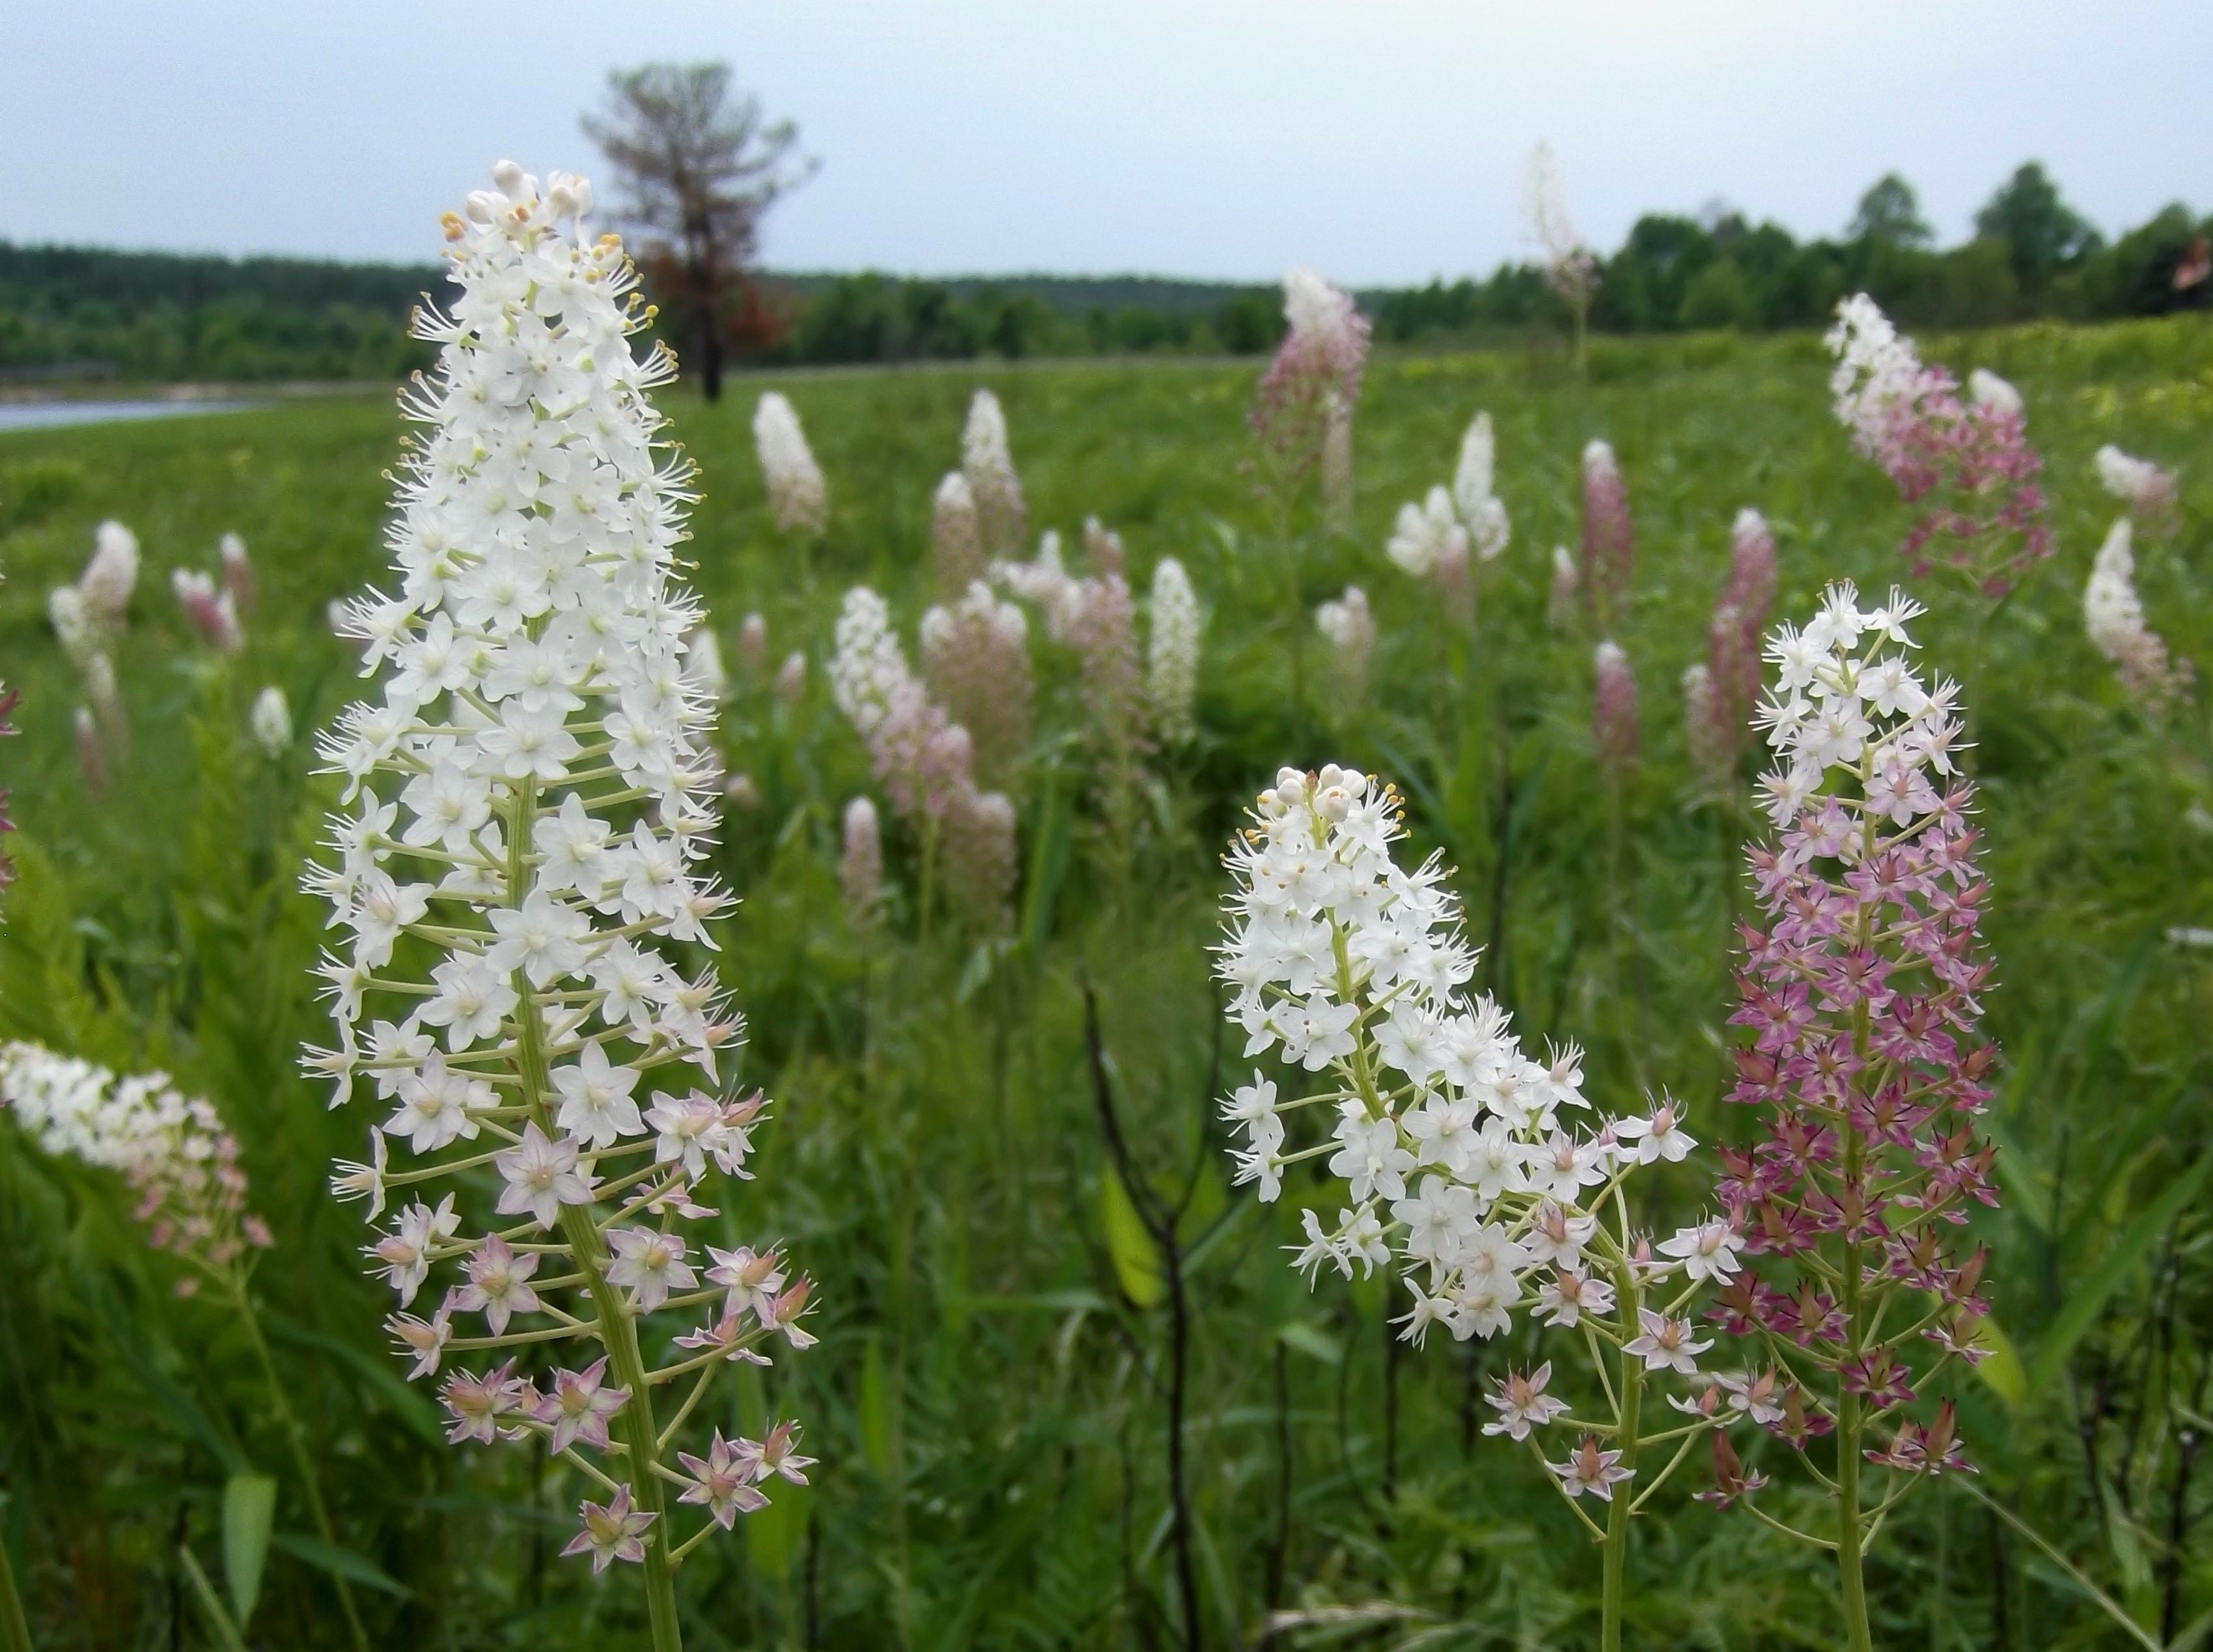 The Scientific Name is Stenanthium densum [= Zigdenus densus]. You will likely hear them called Crow-poison, Crow Poison, Savanna Camass, Black Death Camas, Osceola's-plume. This picture shows the Each plant in a population is an individual and not a clone. Flowers turn pink as they age. of Stenanthium densum [= Zigdenus densus]